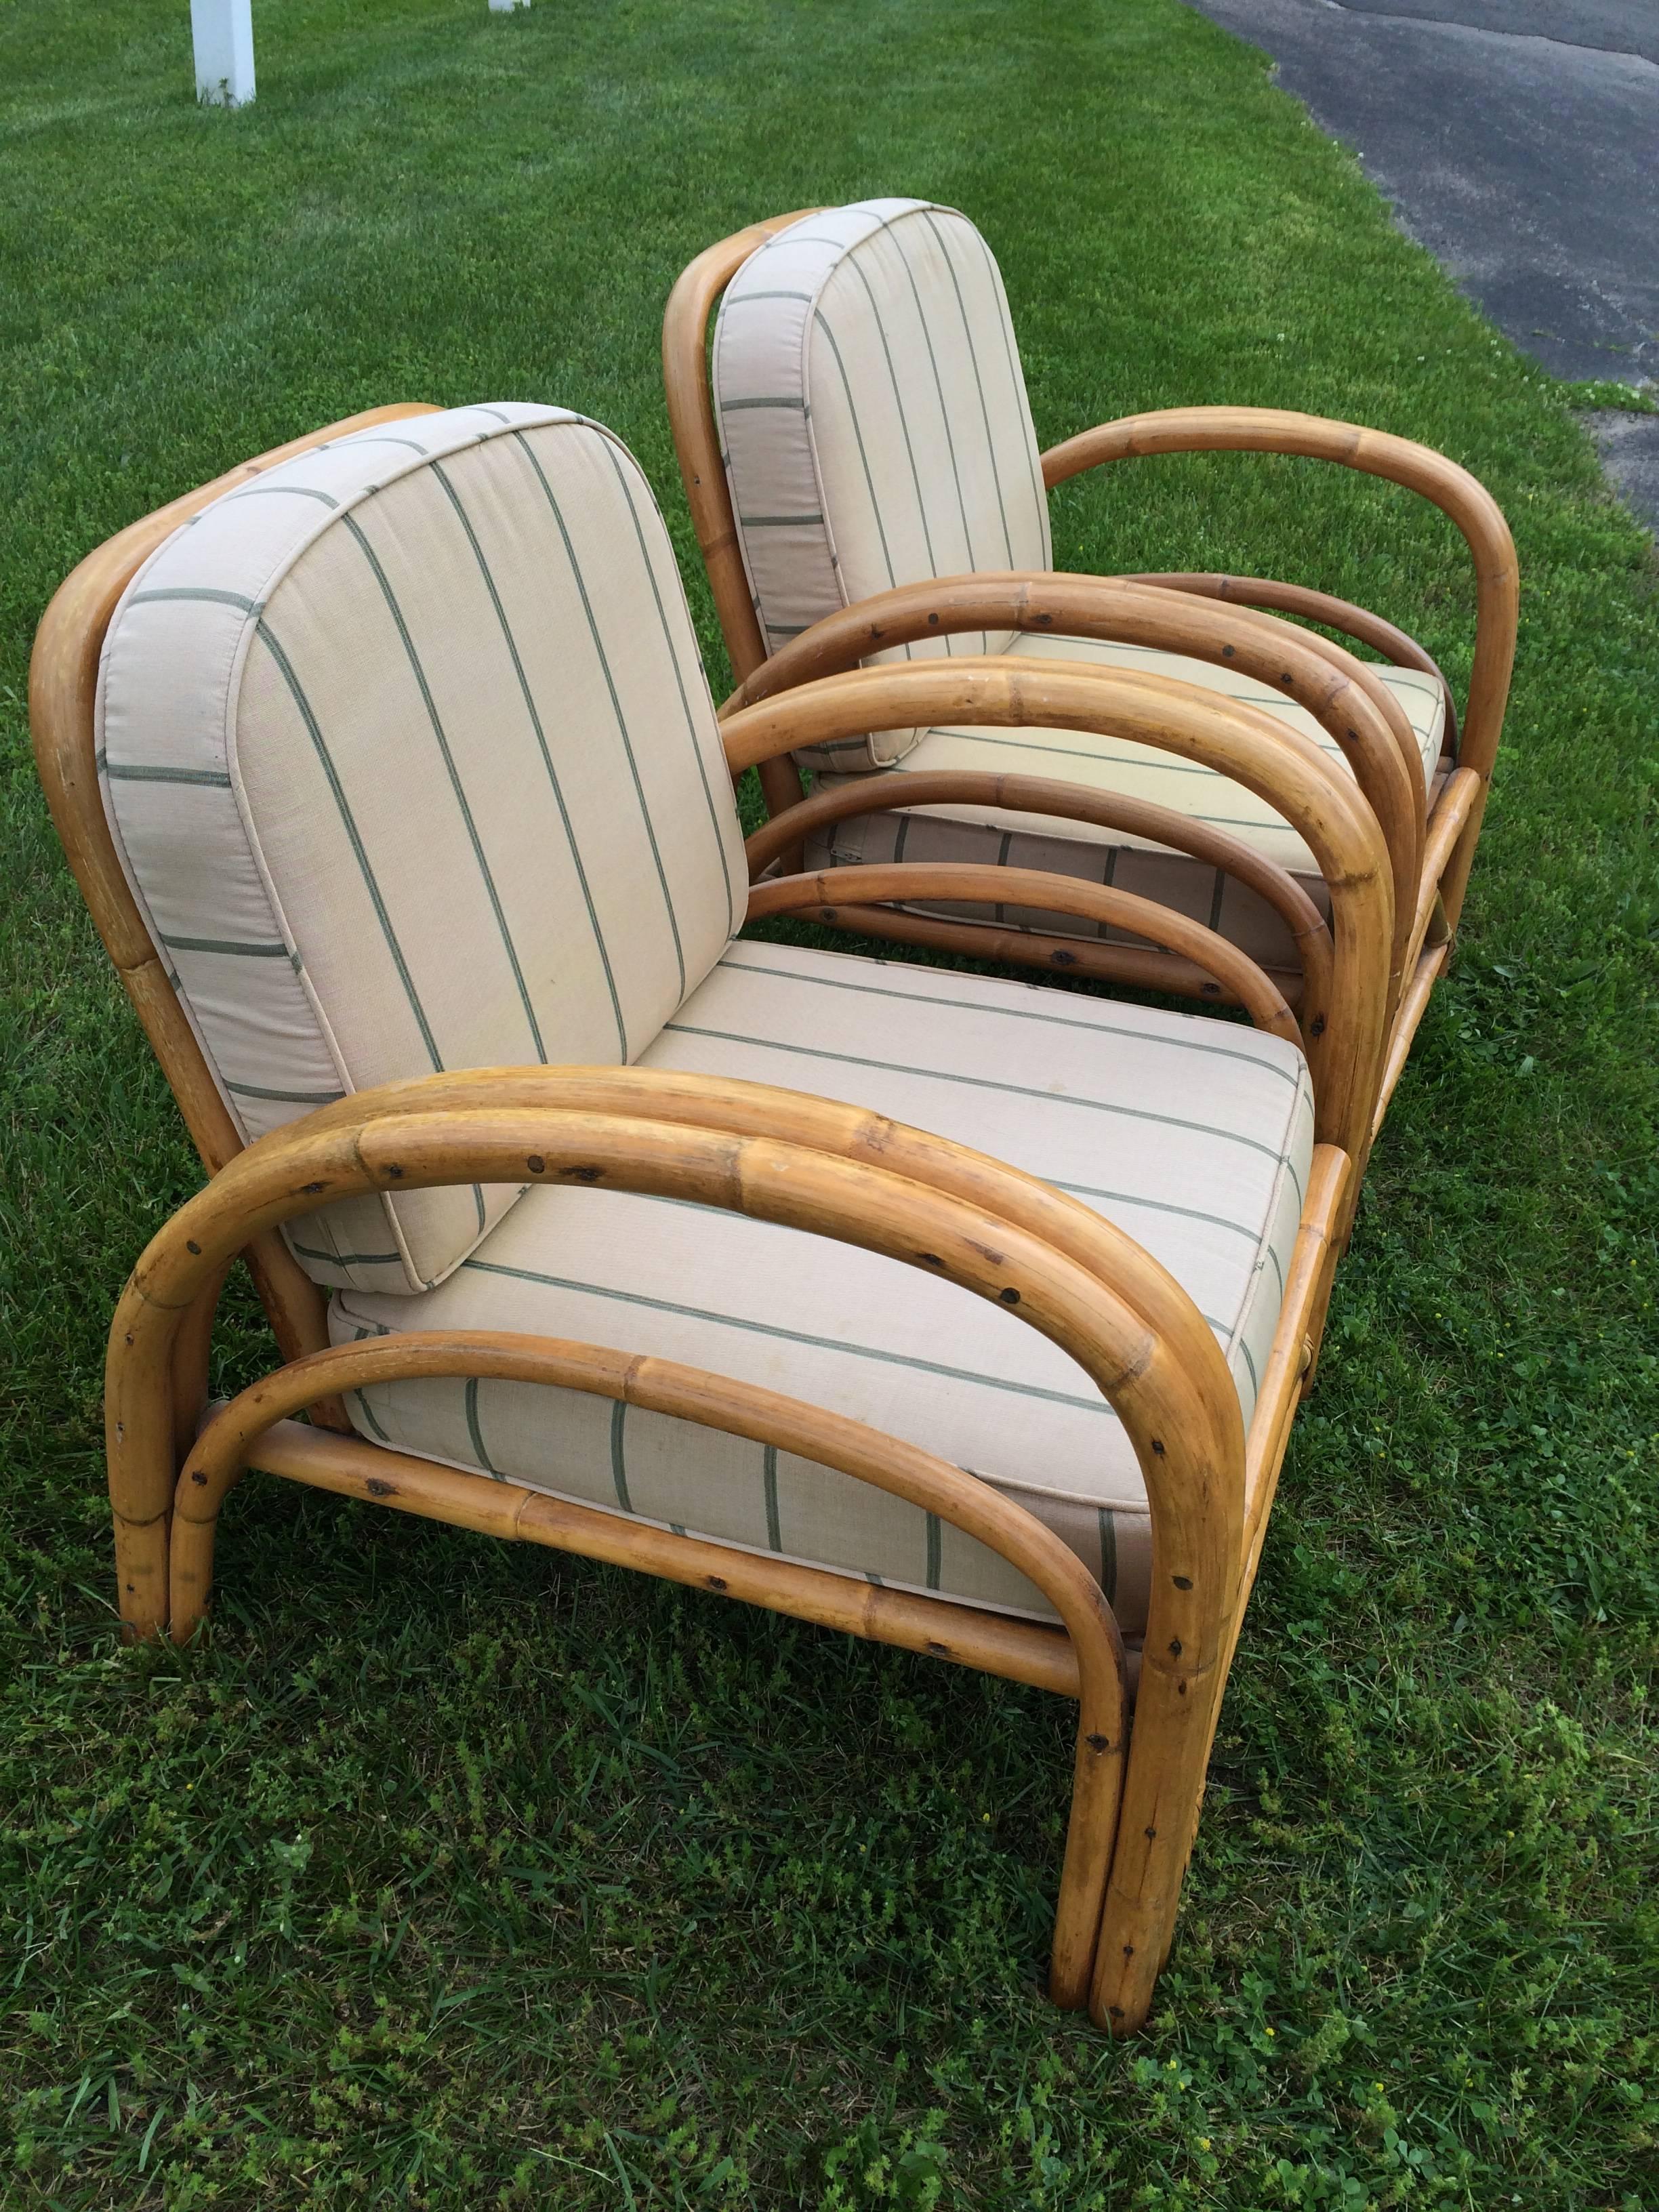 Pair of Rattan Lounge Chairs in the style of Paul Frankl . Classic styling make these chairs timeless . They have practical function as well as beauty. Perfect for that covered porch or screened in patio. Cushions are loose and in good shape. Some